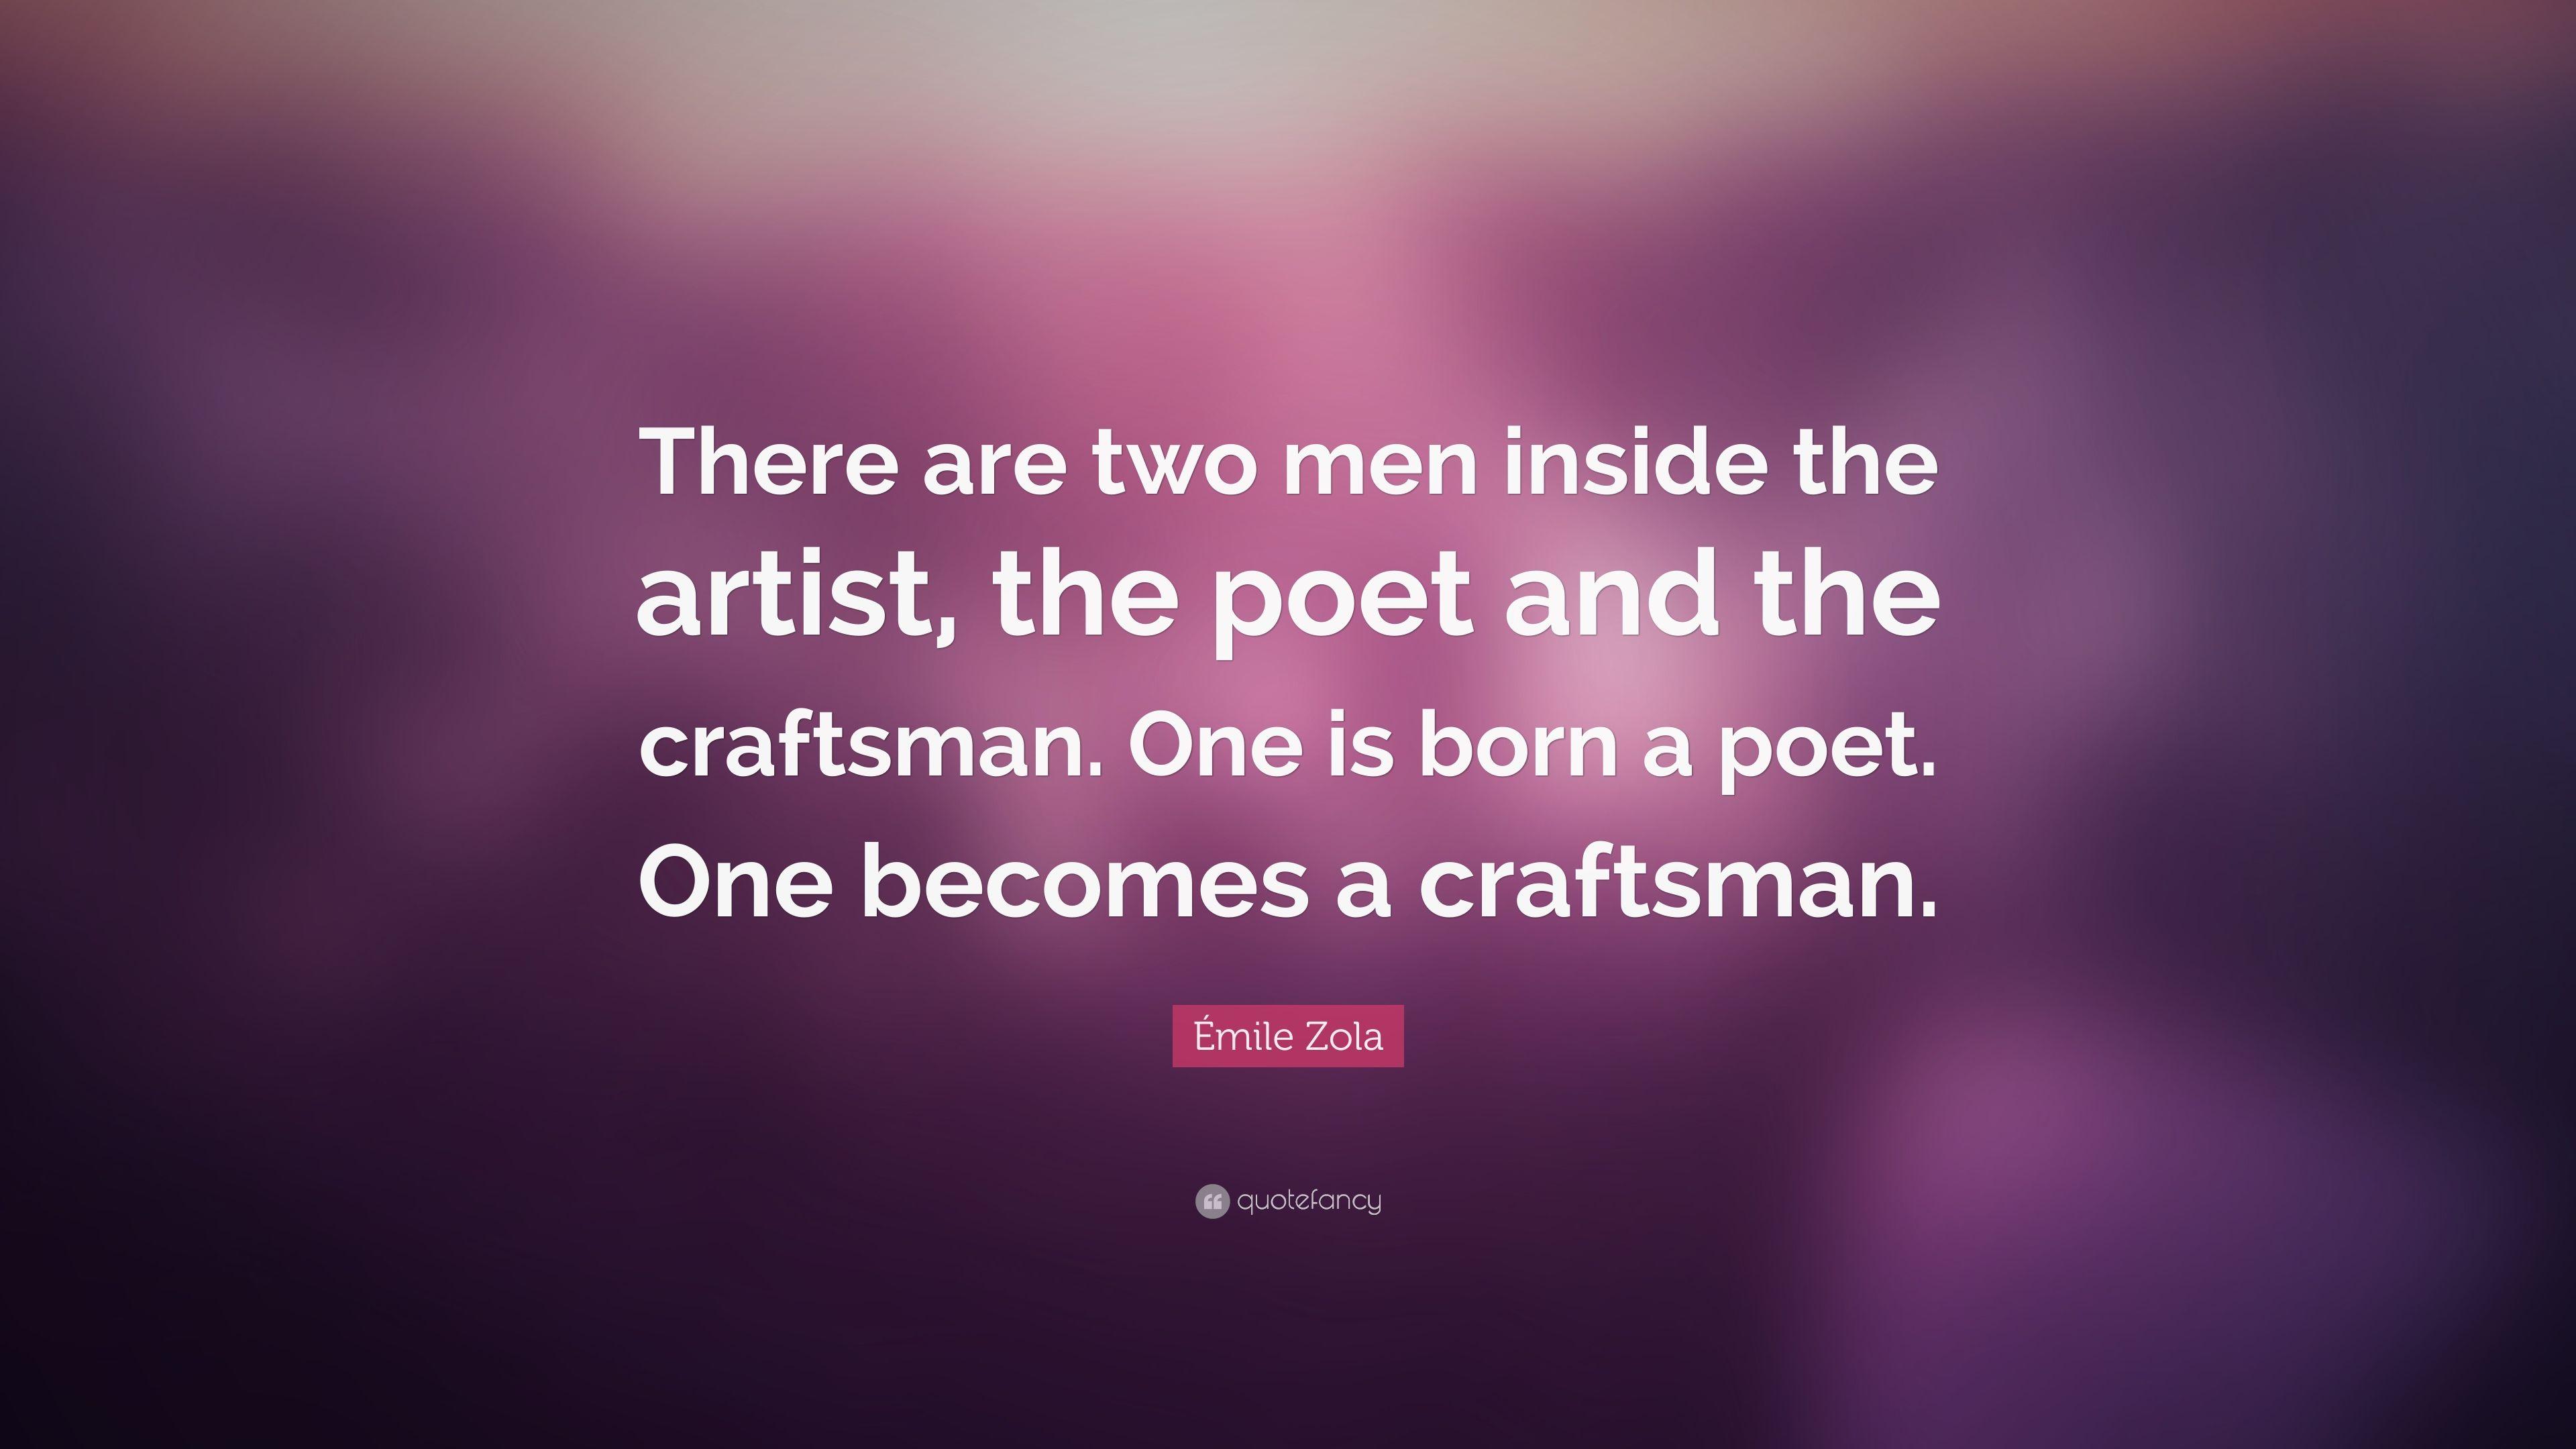 Émile Zola Quote: “There are two men inside the artist, the poet